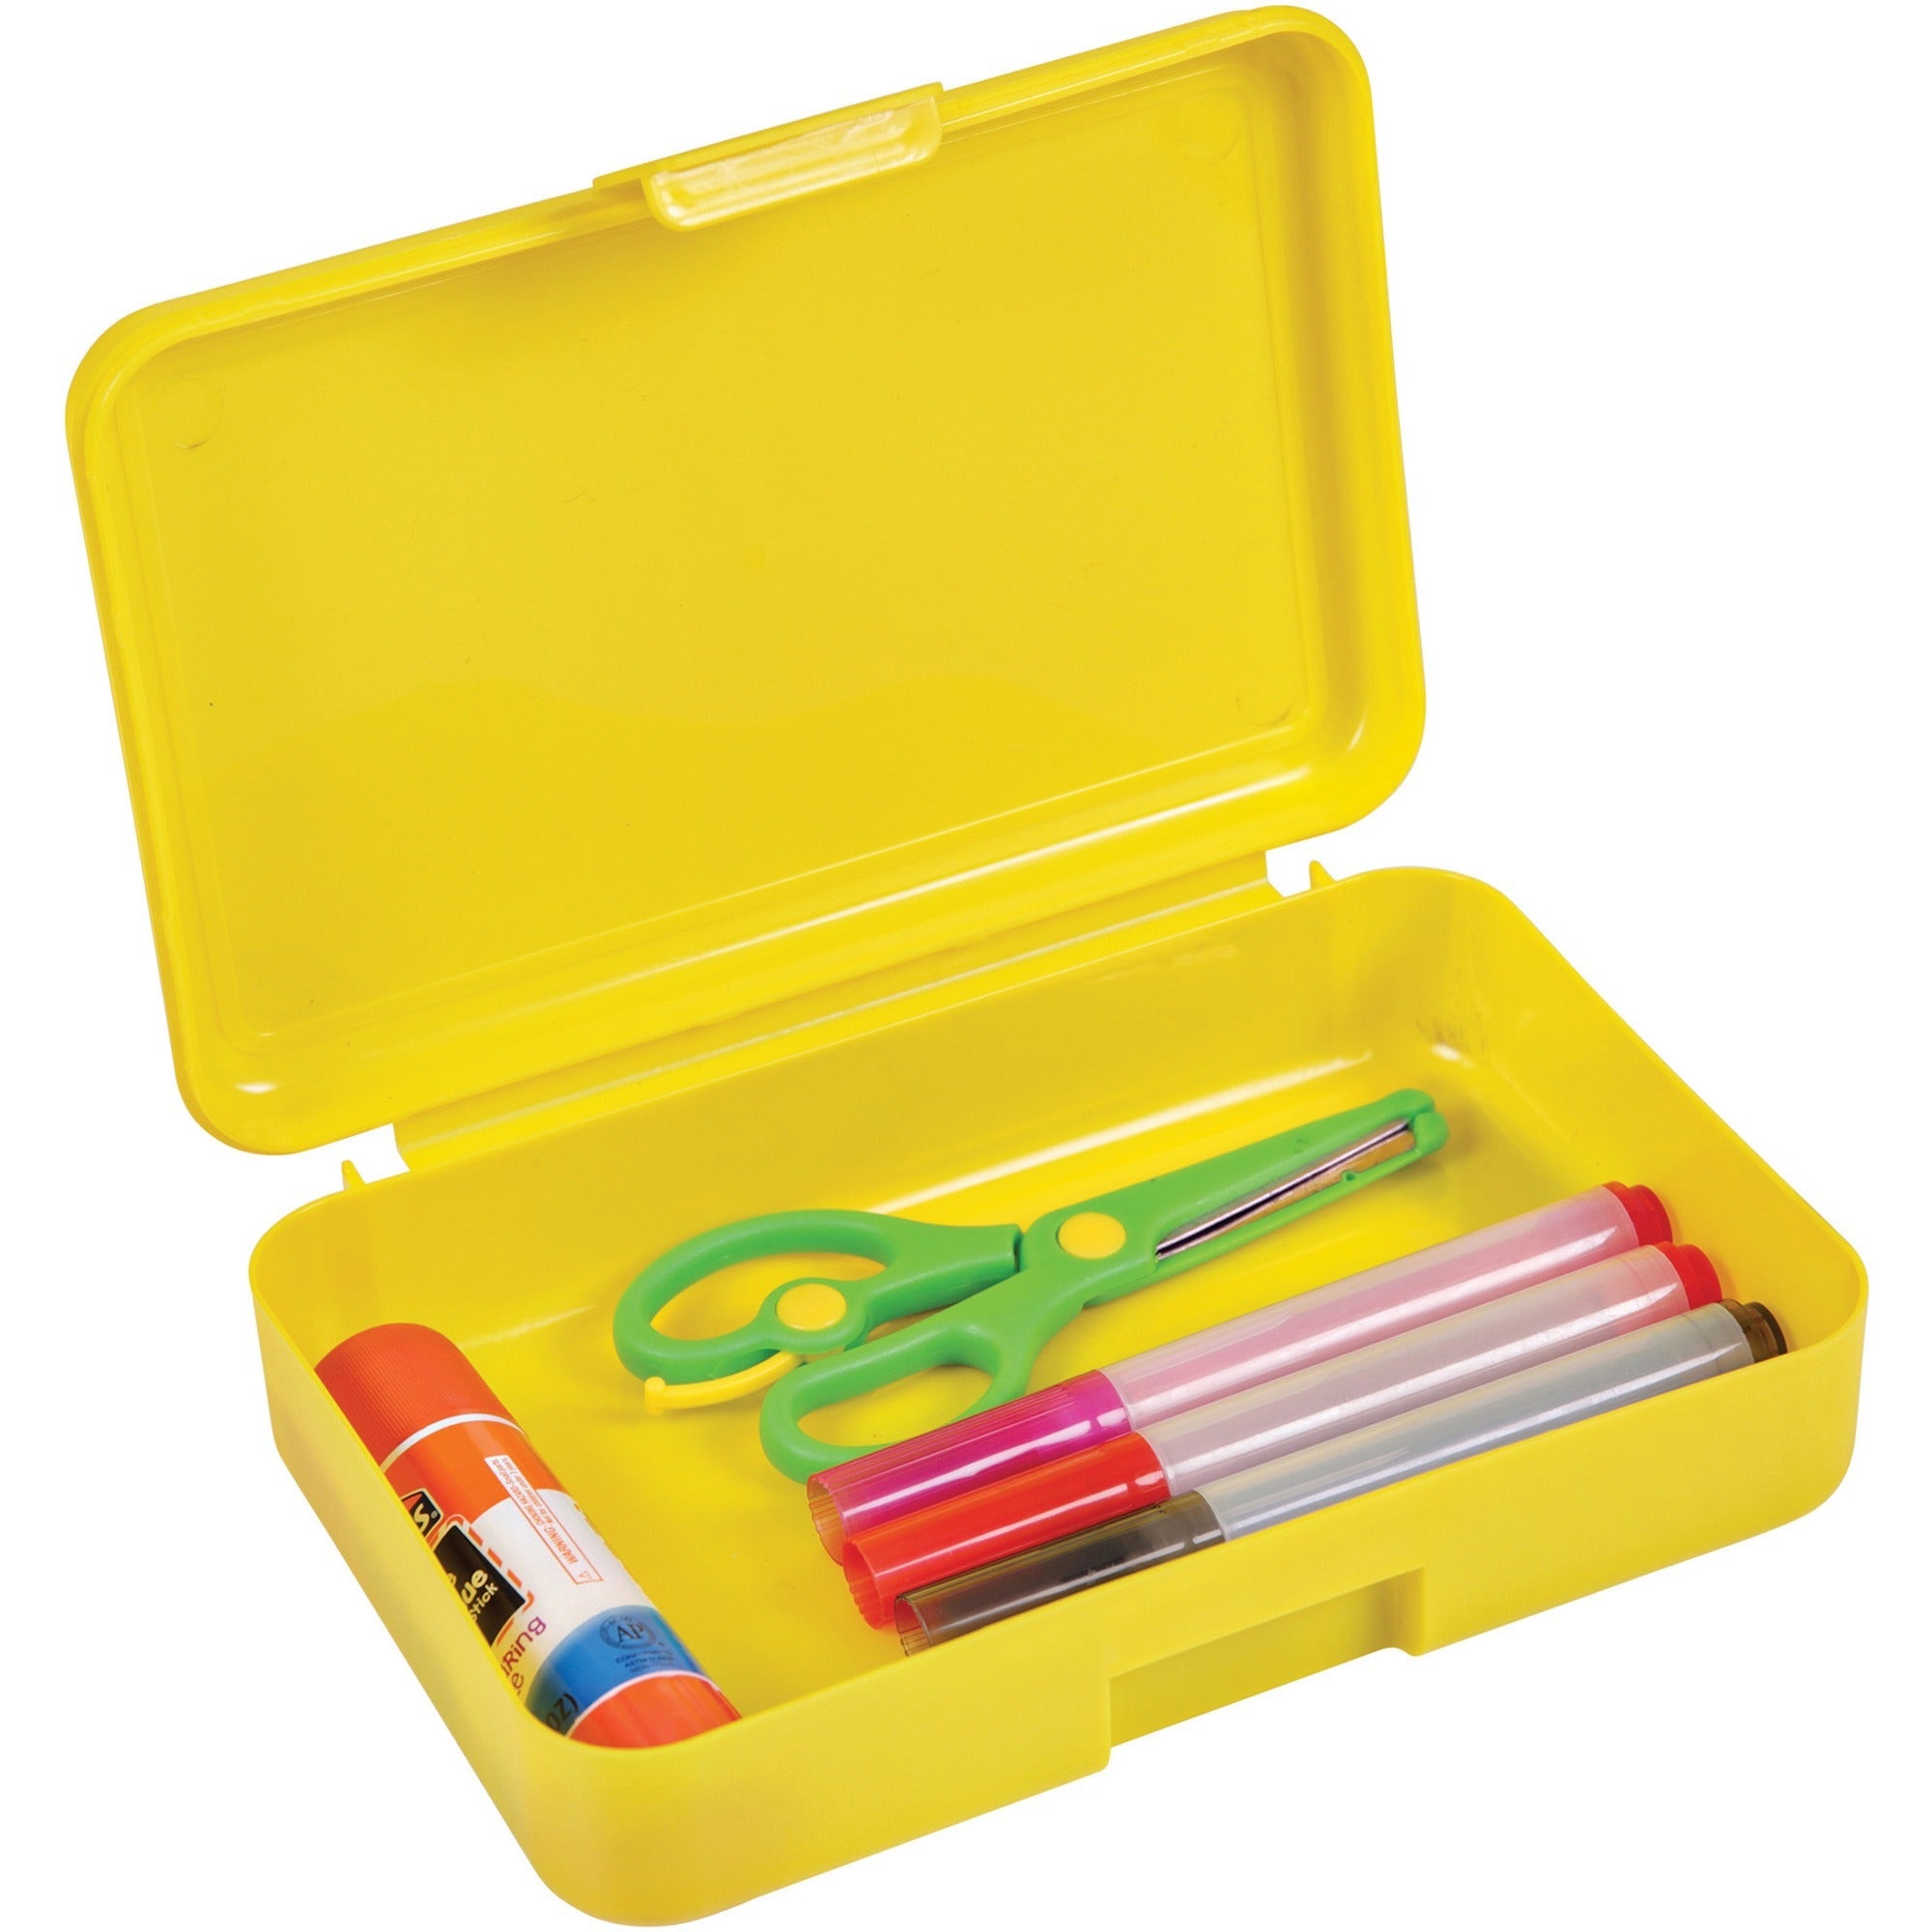 deflecto-antimicrobial-pencil-box-yellow-external-dimensions-54-width-x-8-depth-x-2-height-snap-closure-plastic-yellow-for-pencil-marker-supplies_def39504yel - 1